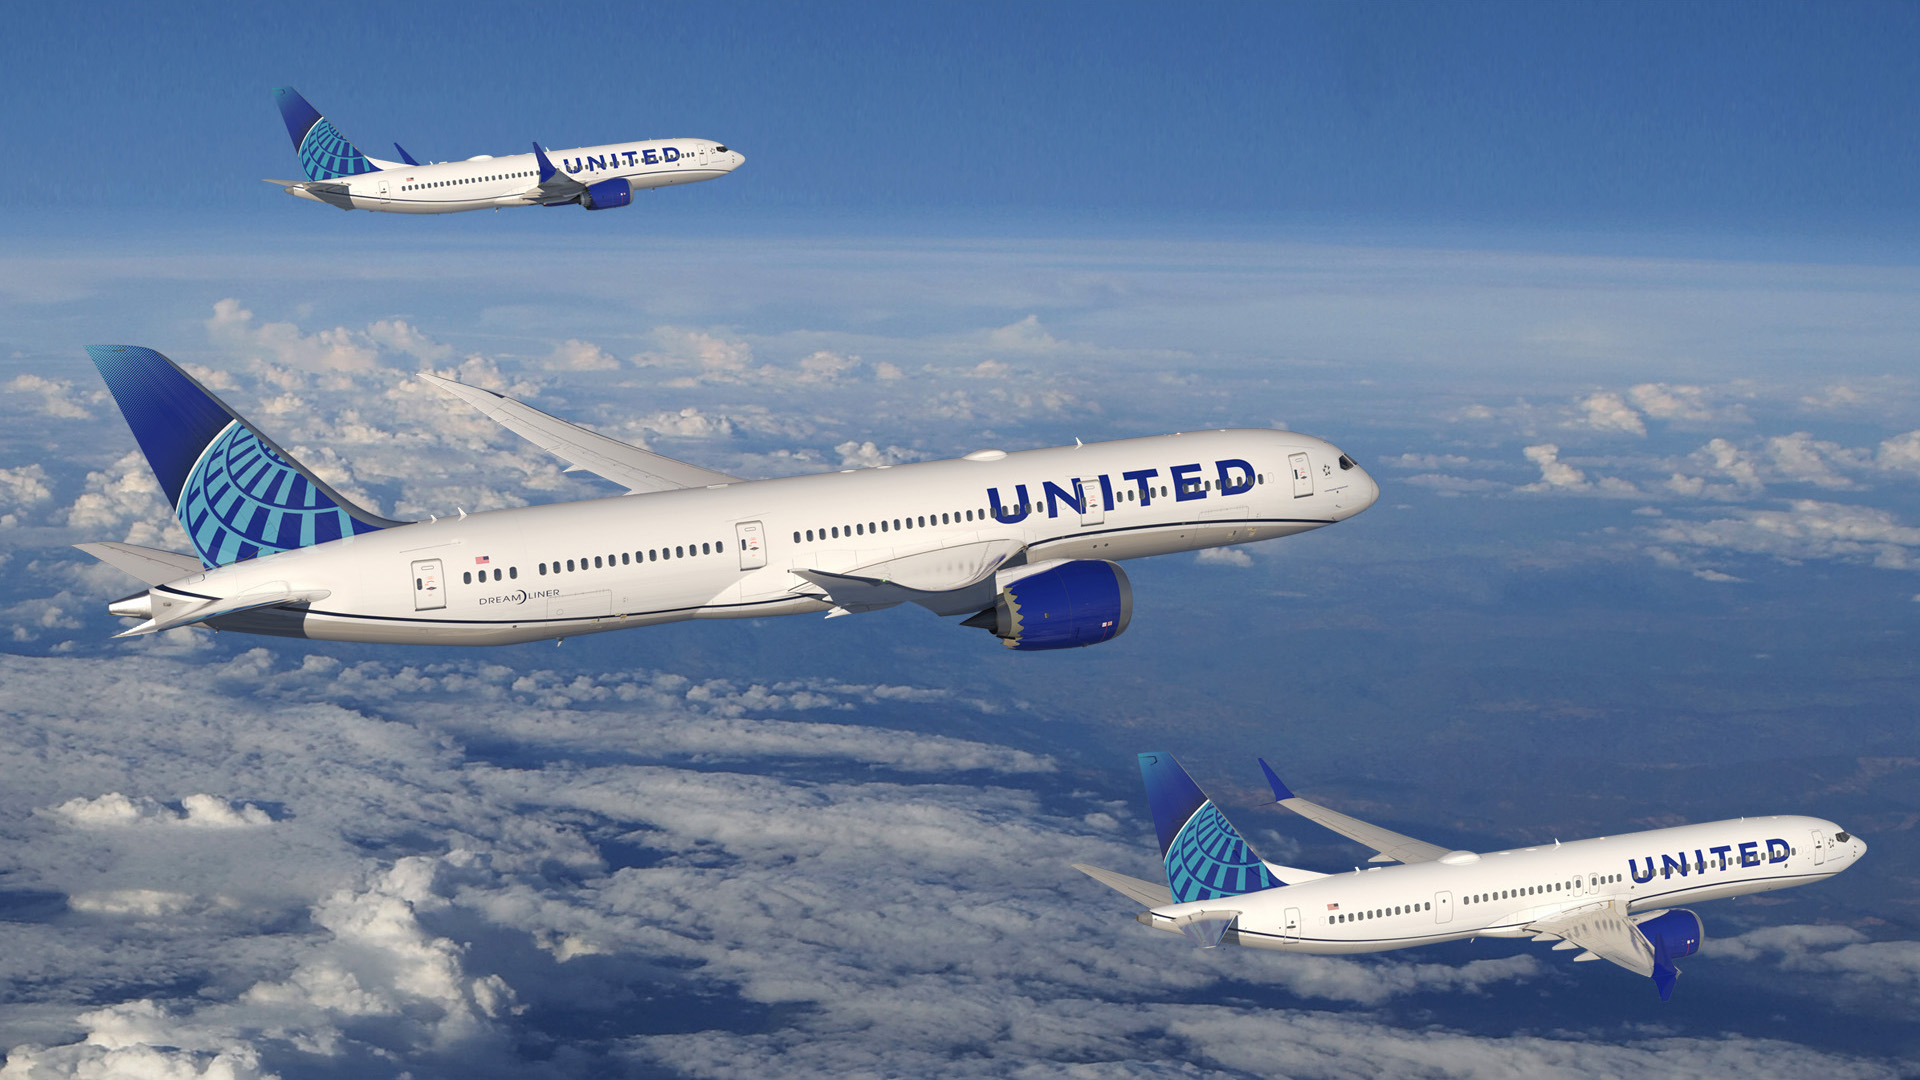  Press Release ! United made largest widebody aircraft order by a U.S. carrier in commercial aviation history , Firm order for 100 new 787 Dreamliners and option of 100 more  !